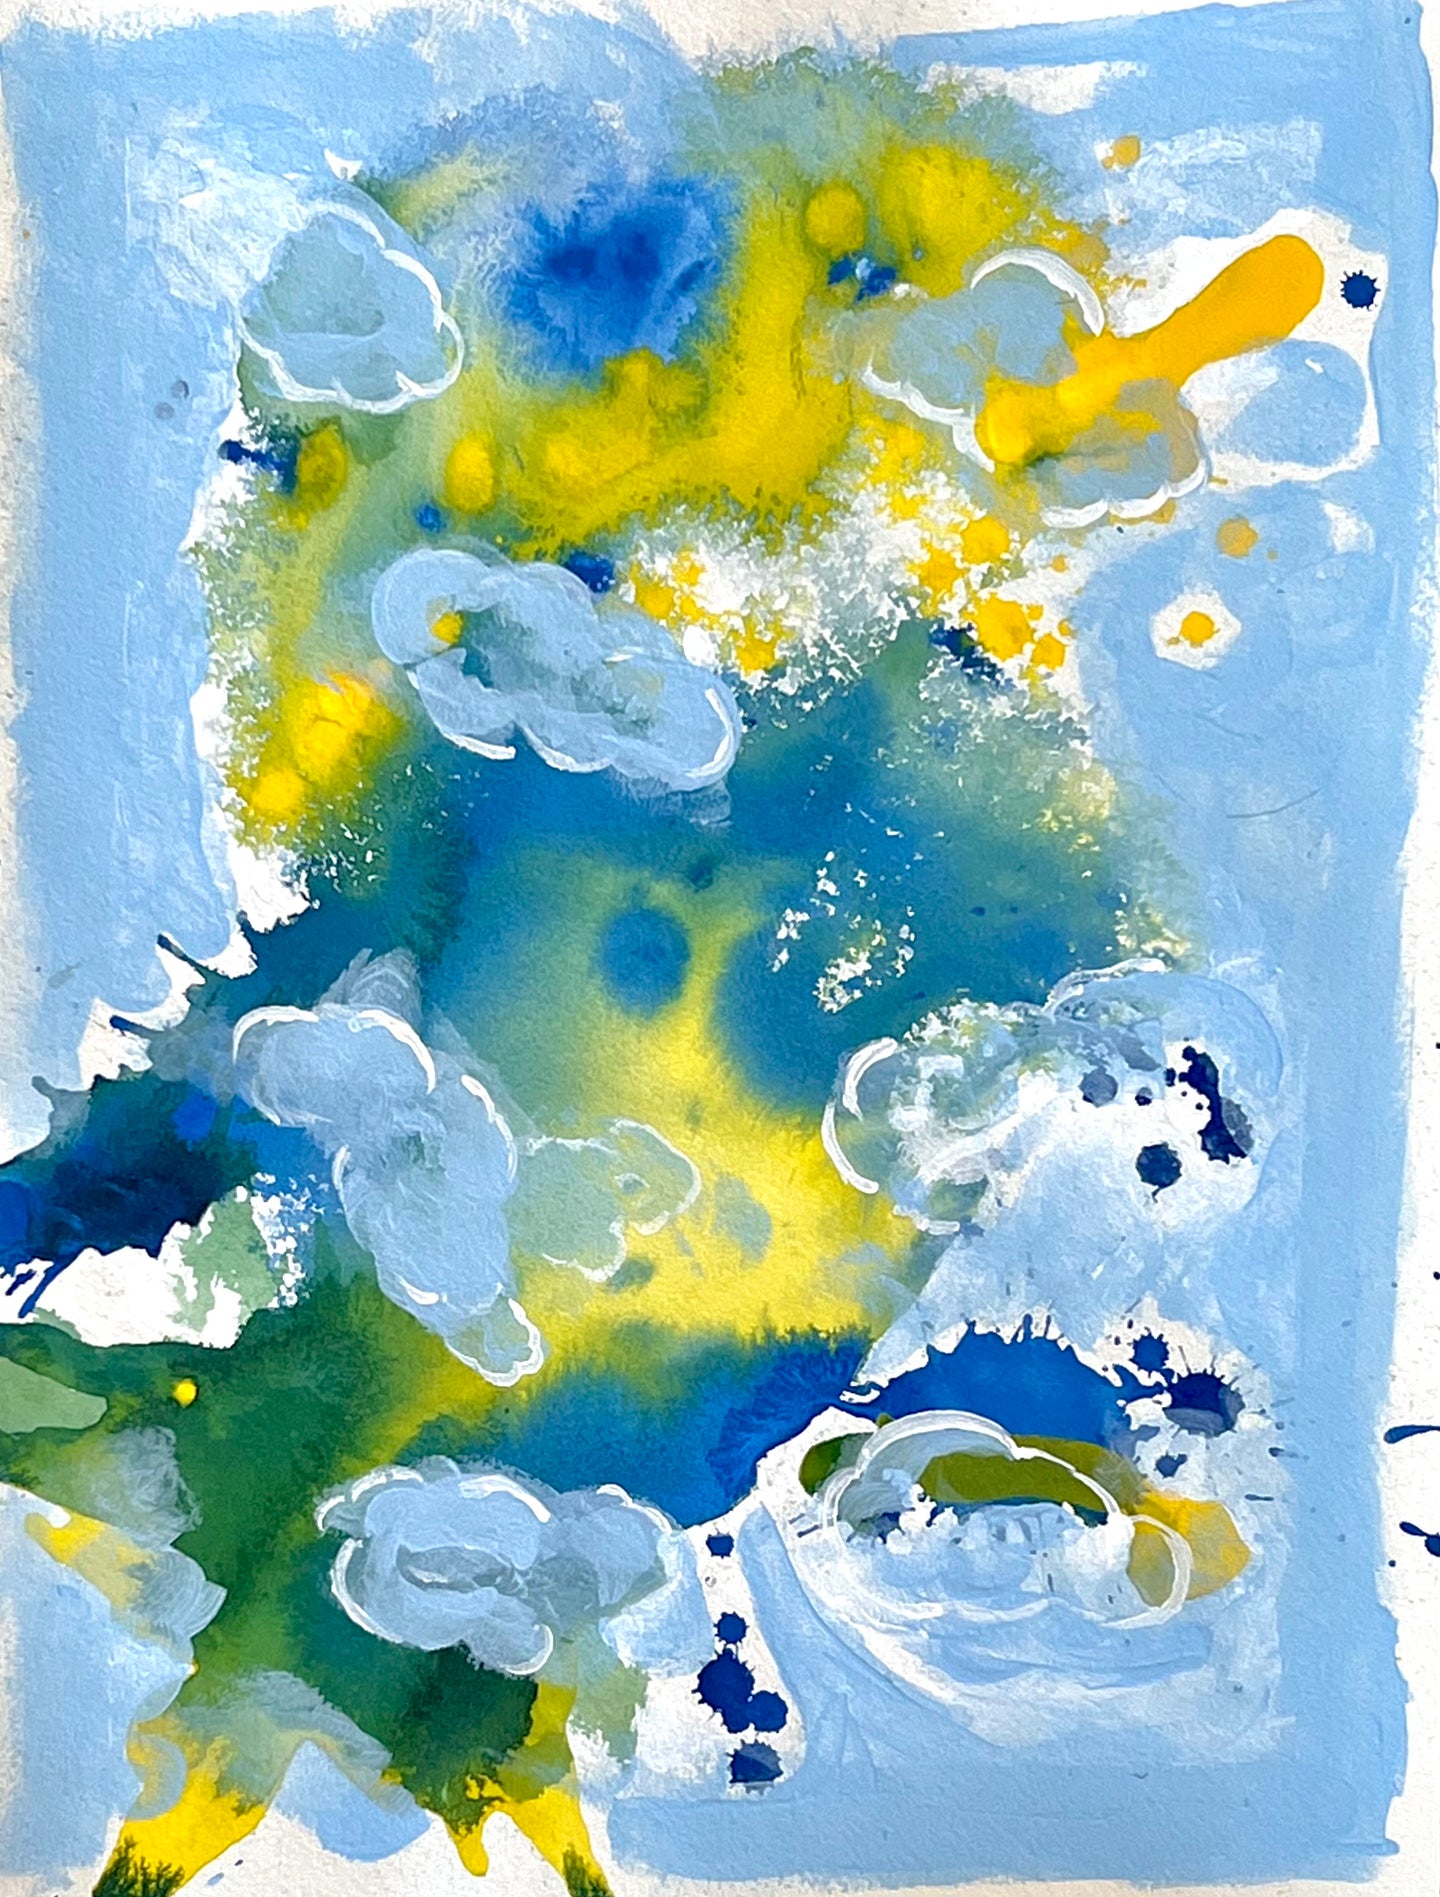 Camila Webster’s Blue and Yellow Abstract Painting, “Skies Over Miami 1,” 2022, Watercolor and acrlyic painting on paper, 16 x 12 inches, on display and available at the Ritz Carlton South Beach